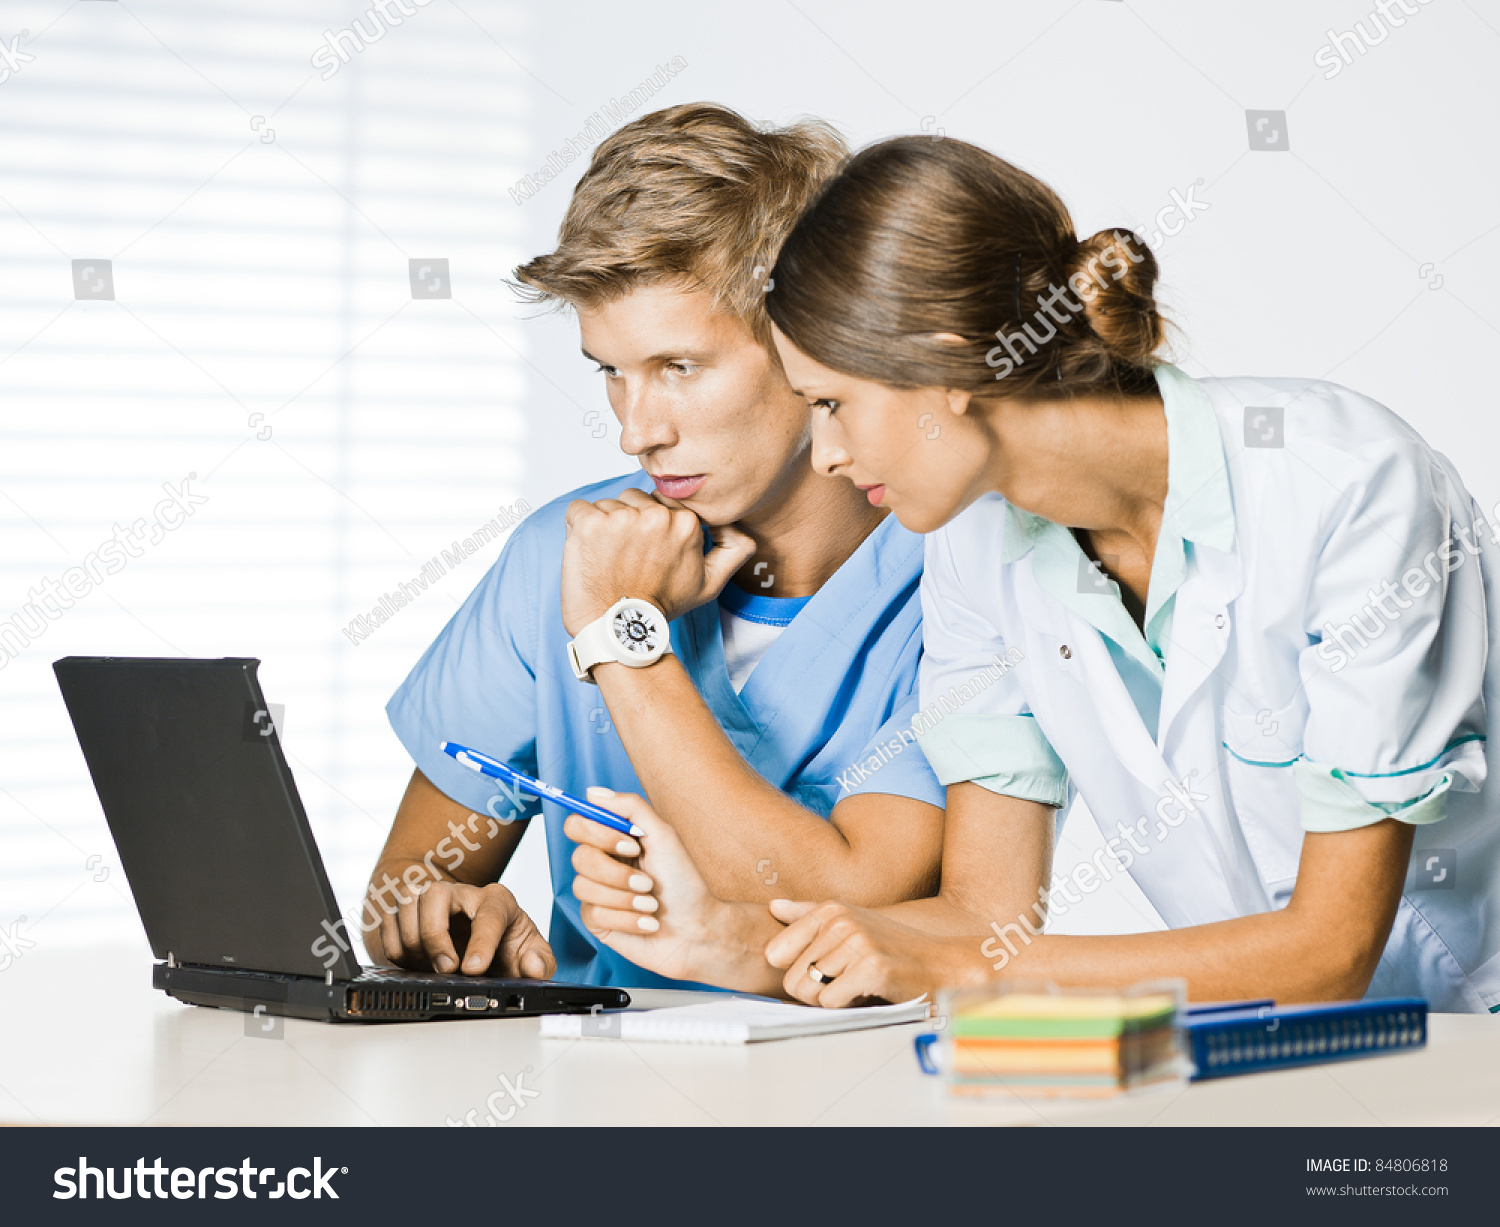 doctor and nurse at computer desk #84806818